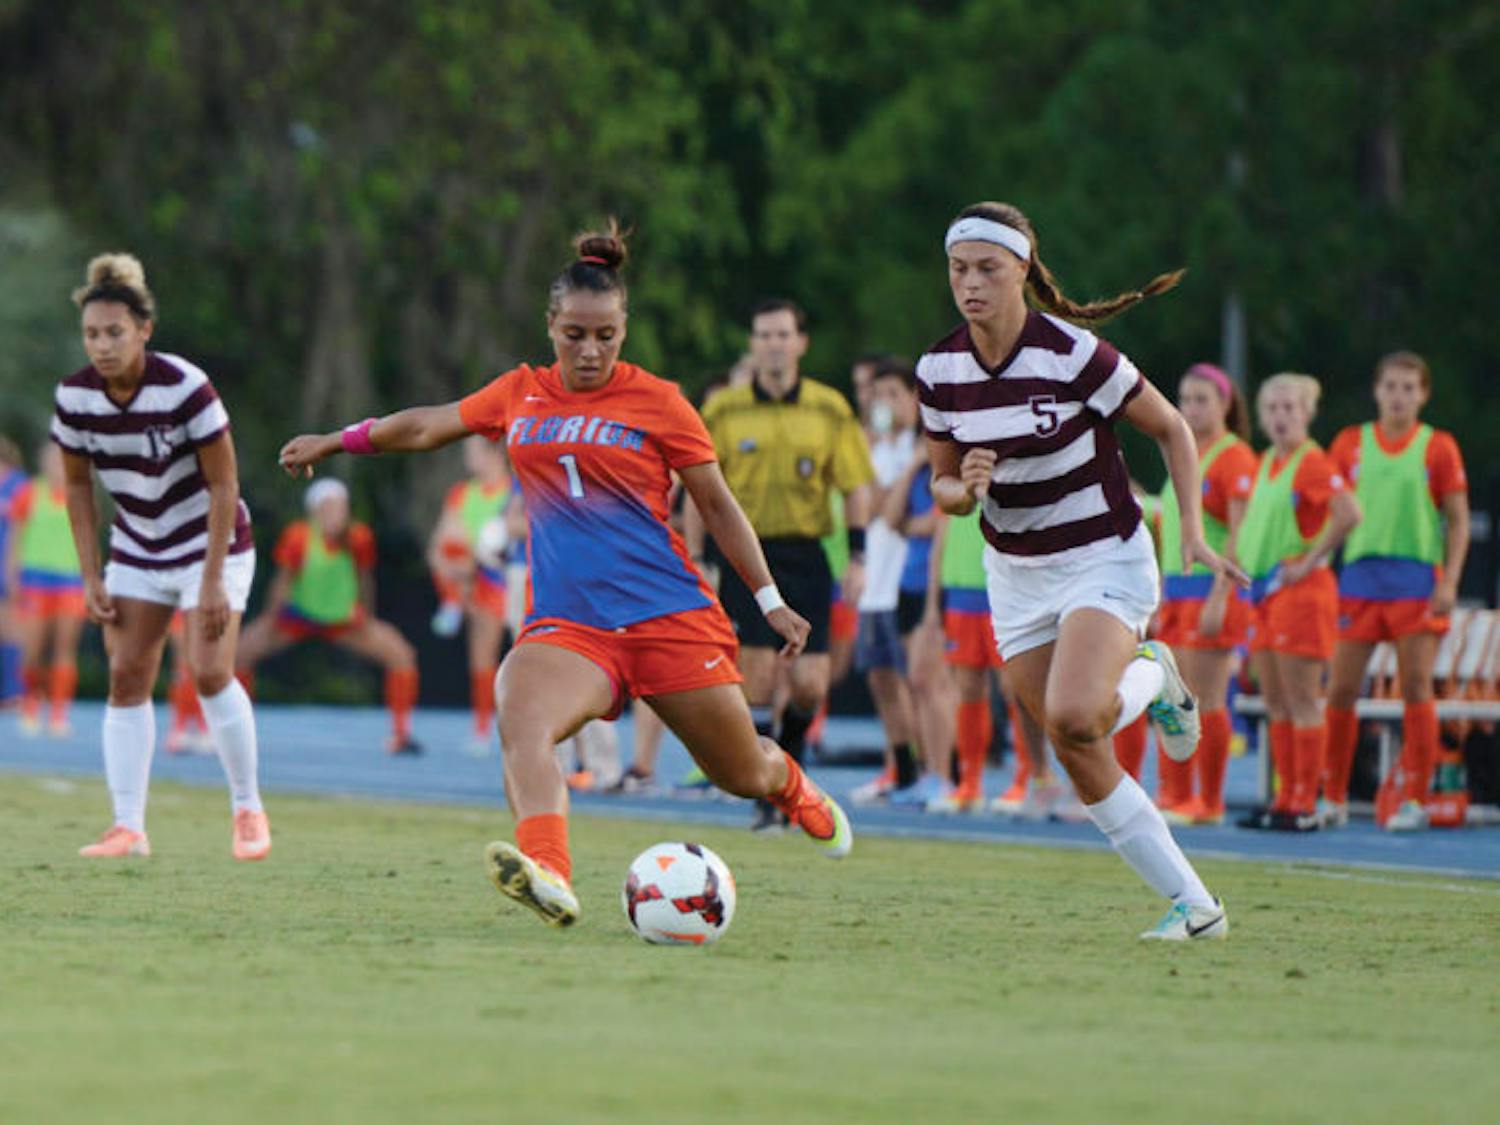 Lauren Silver kicks the ball during Florida’s 2-0 victory against Minnesota on Sept. 13 at James G. Pressly Stadium.